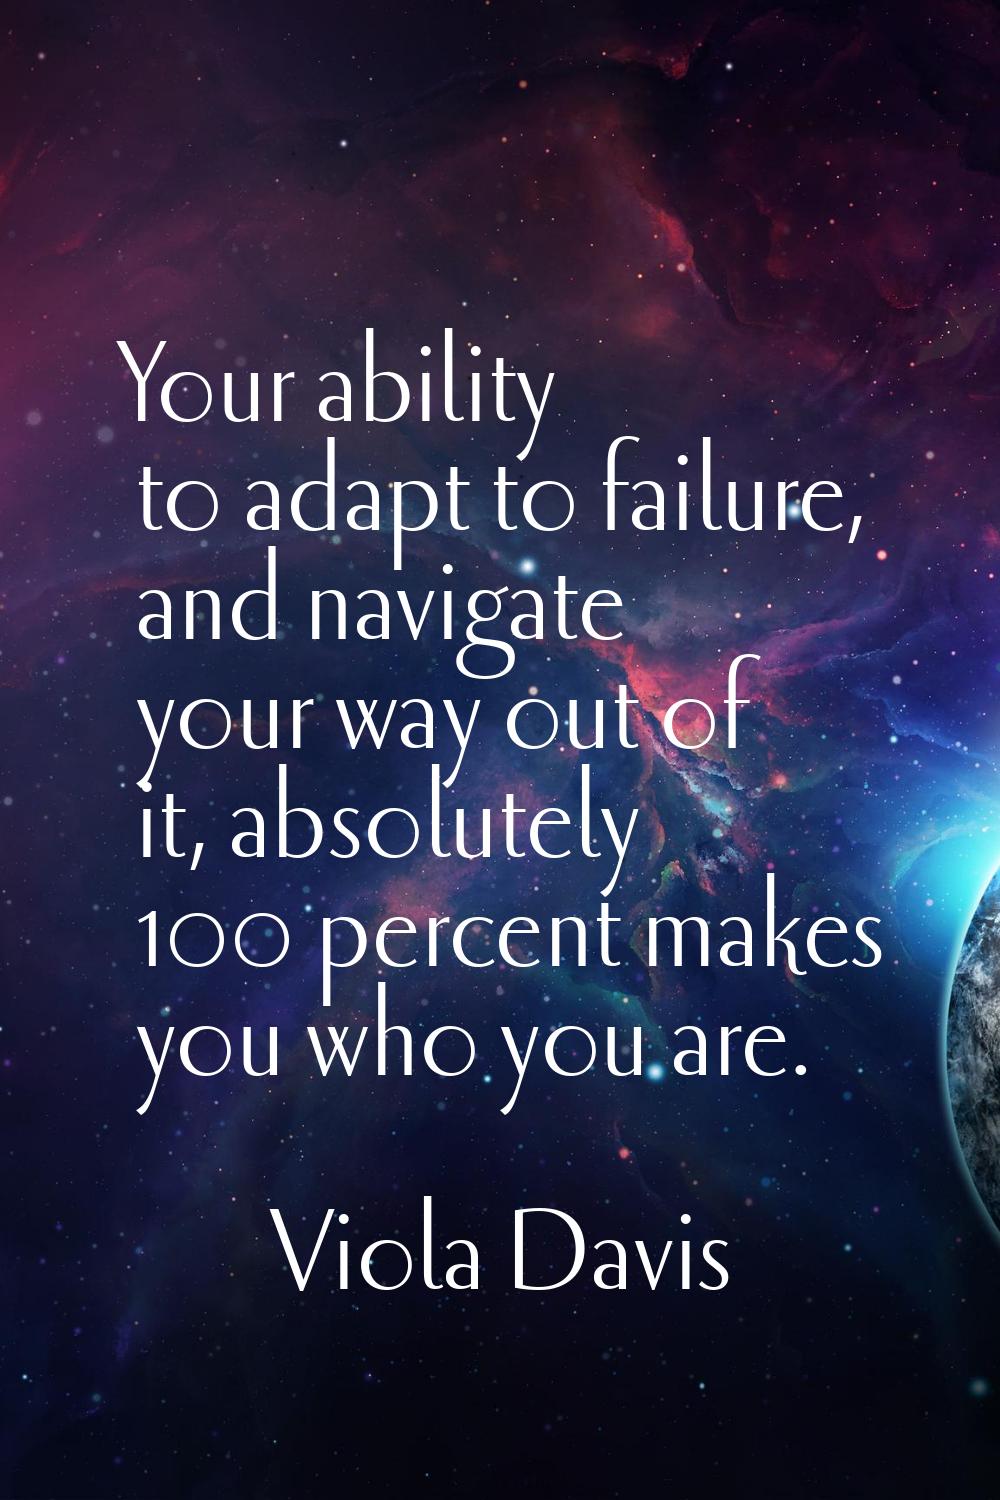 Your ability to adapt to failure, and navigate your way out of it, absolutely 100 percent makes you